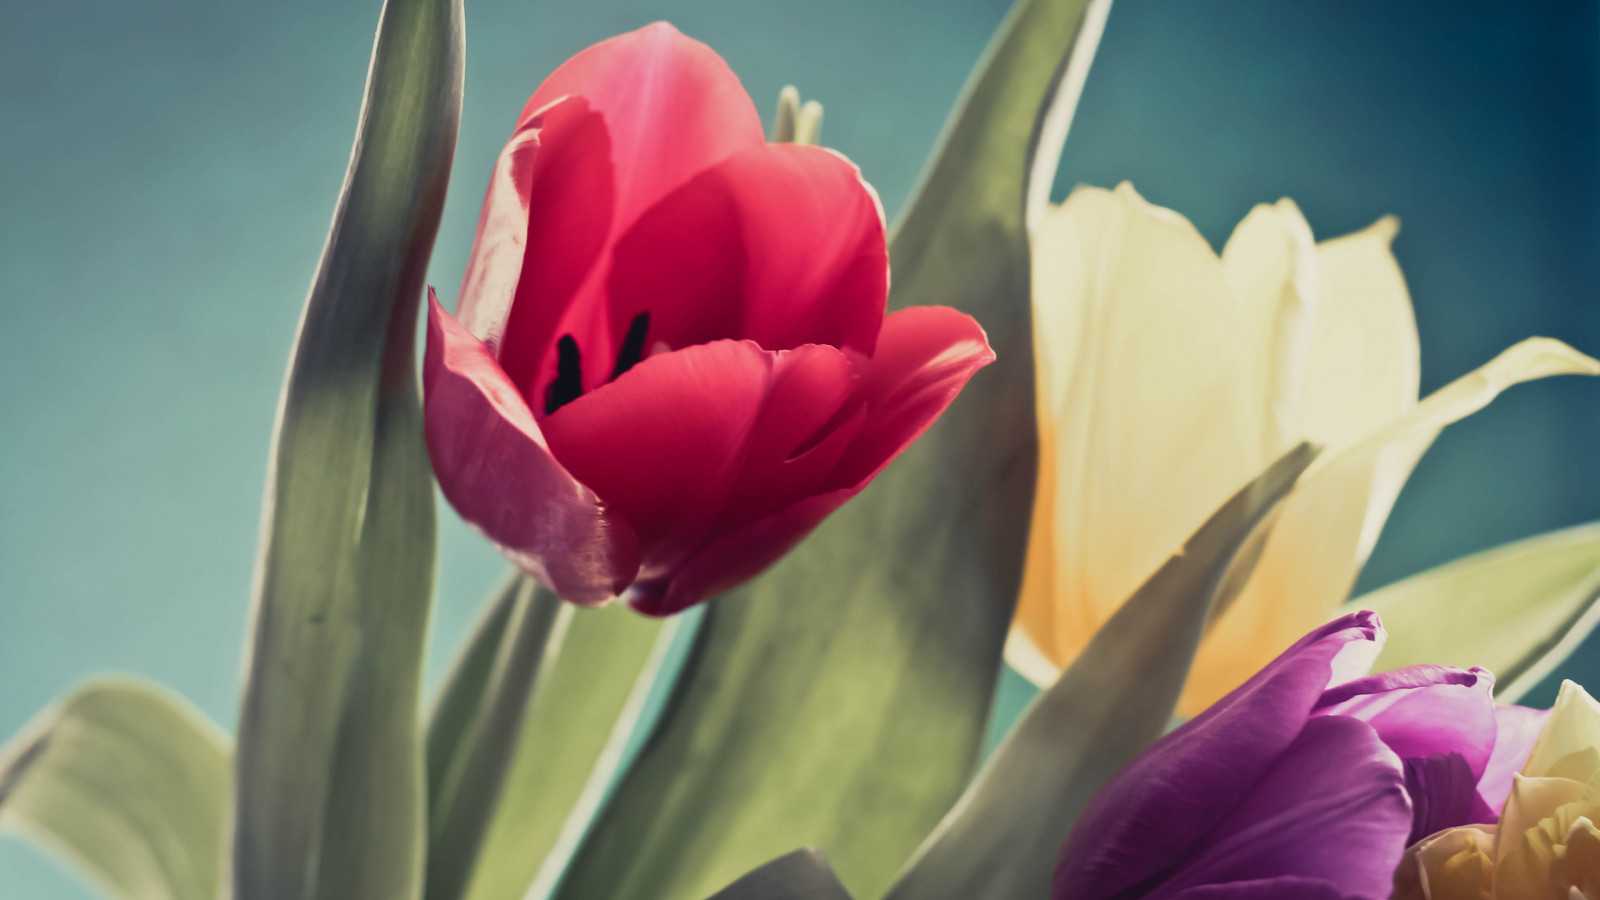 Red, purple and yellow tulips wallpaper 1600x900